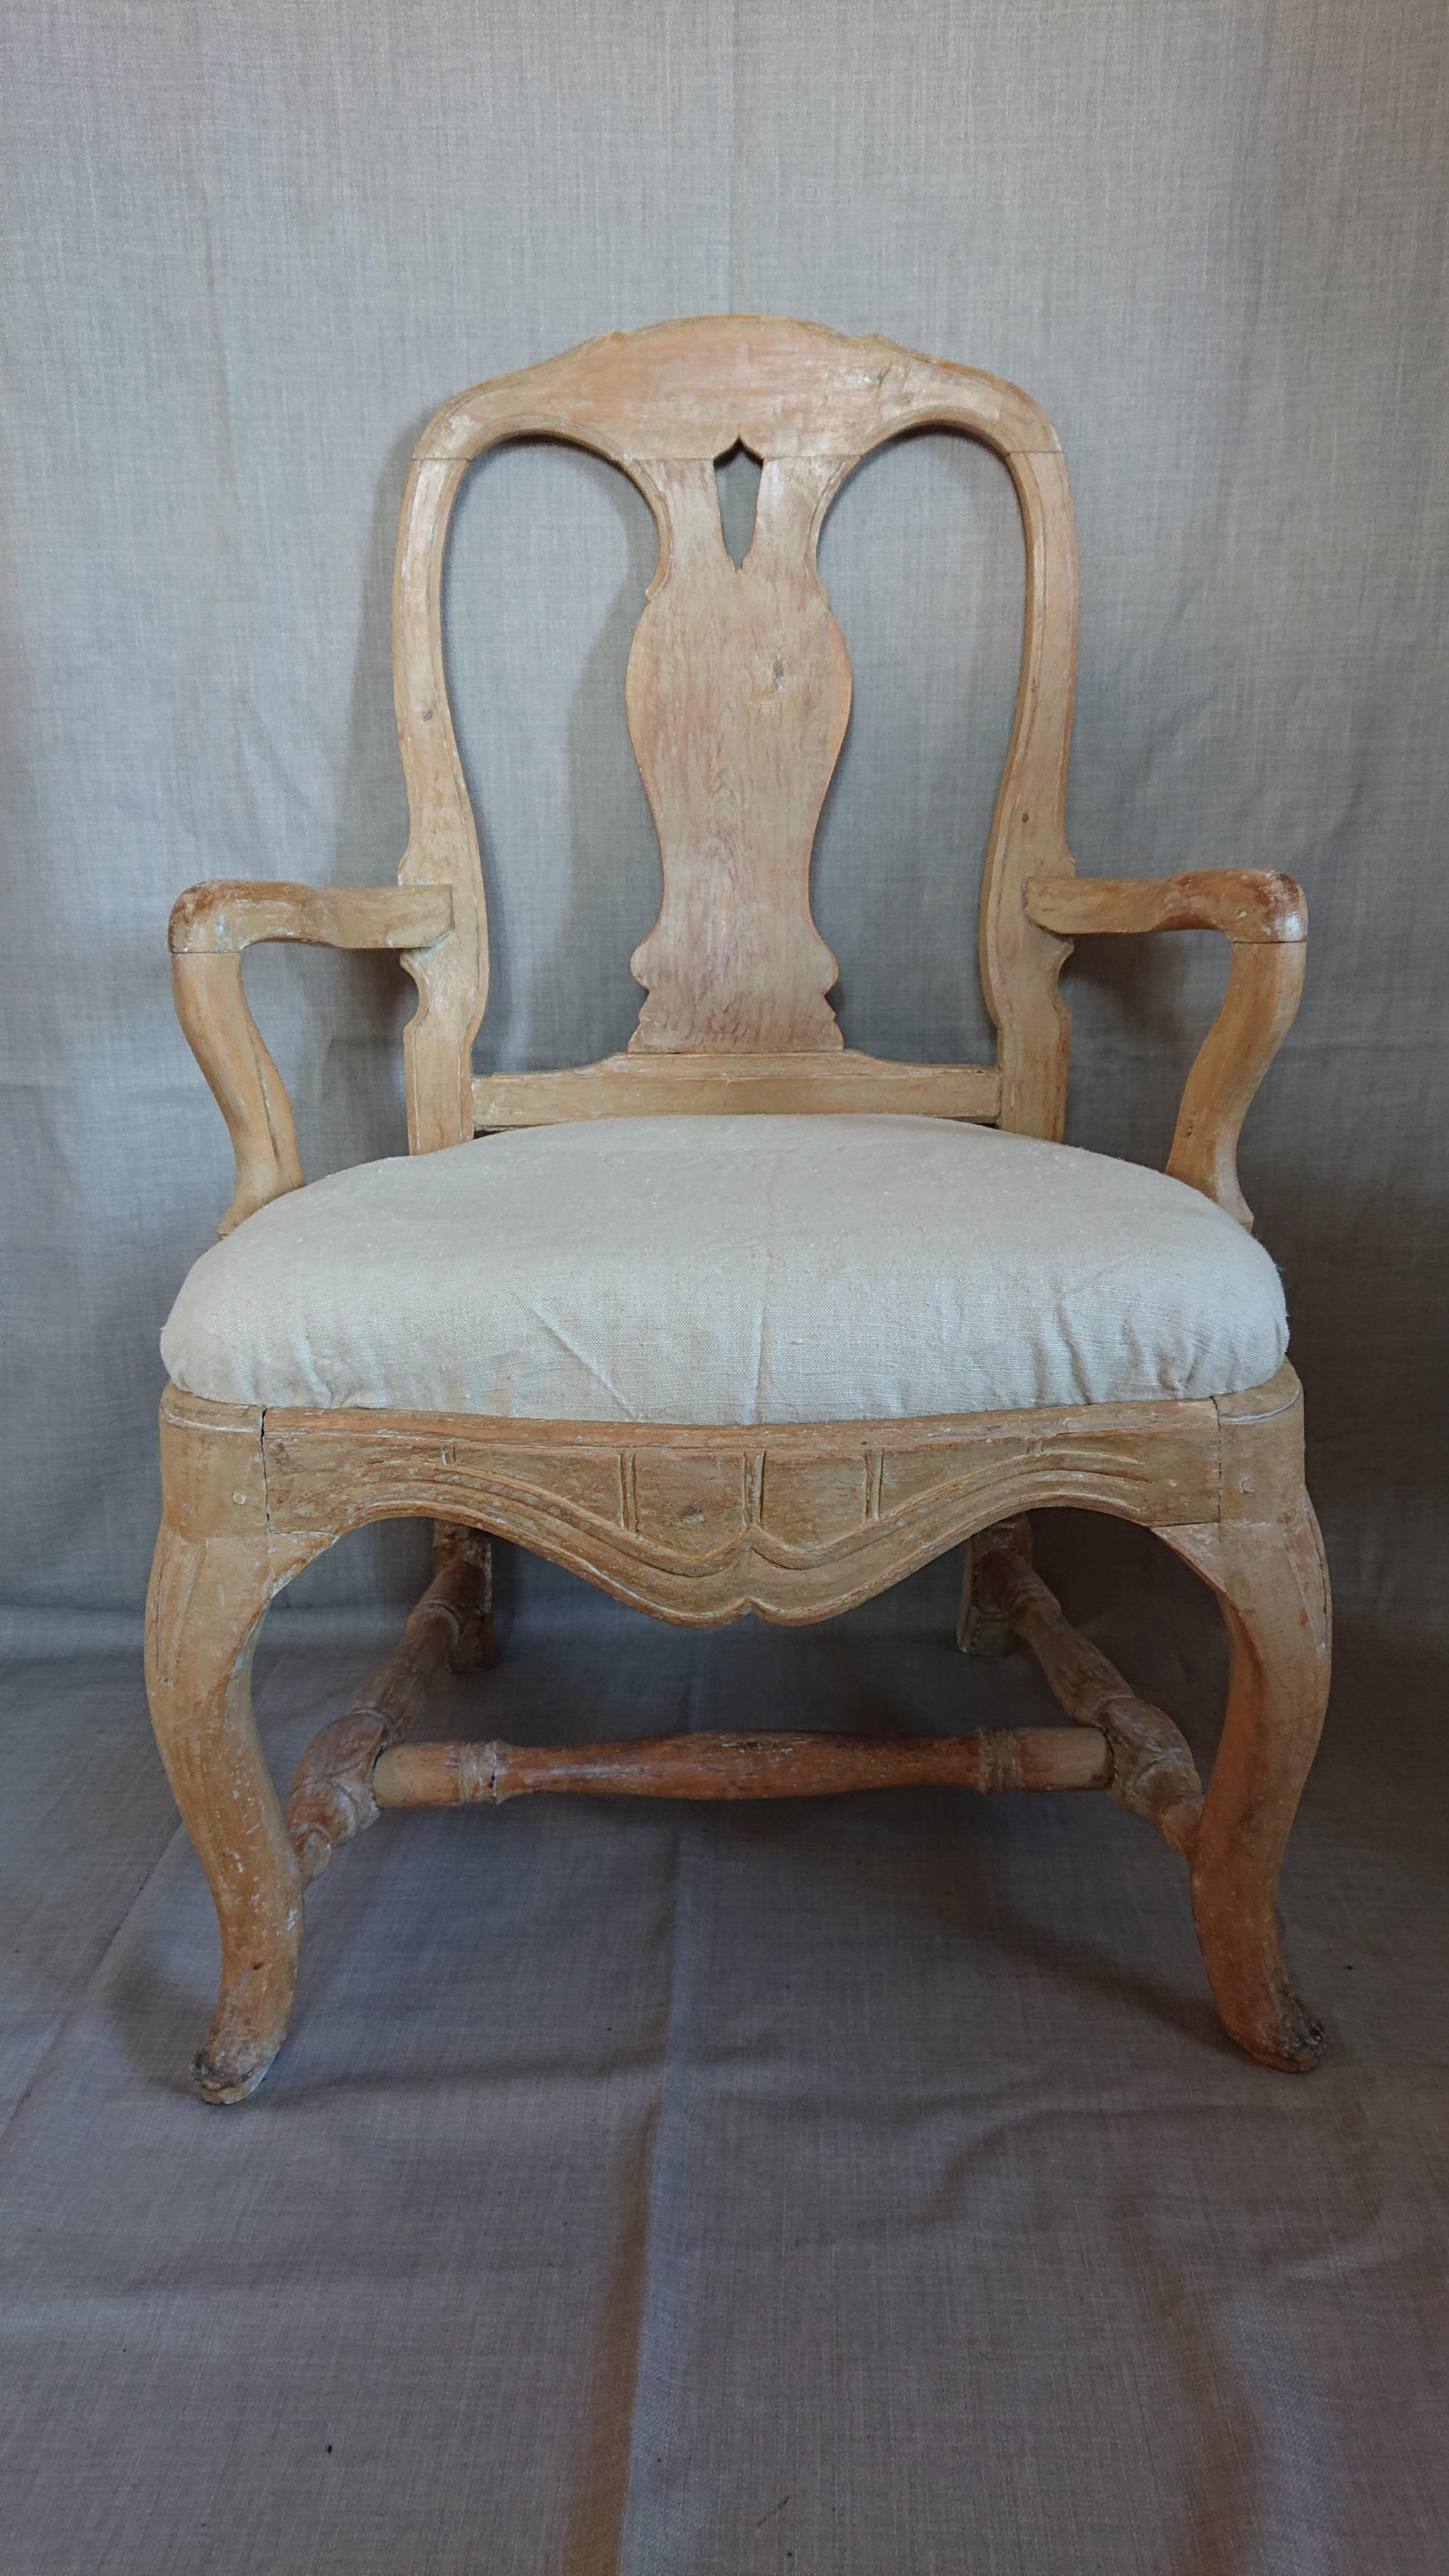 18th century Swedish Rococo arm chair from Sundsvall Medelpad, Northern Sweden.
A beautiful arm chair with nice proportions & curvy legs.
Scraped by hand to its original color.
The chair seat is upholstered in linen fabric.
Made in painted